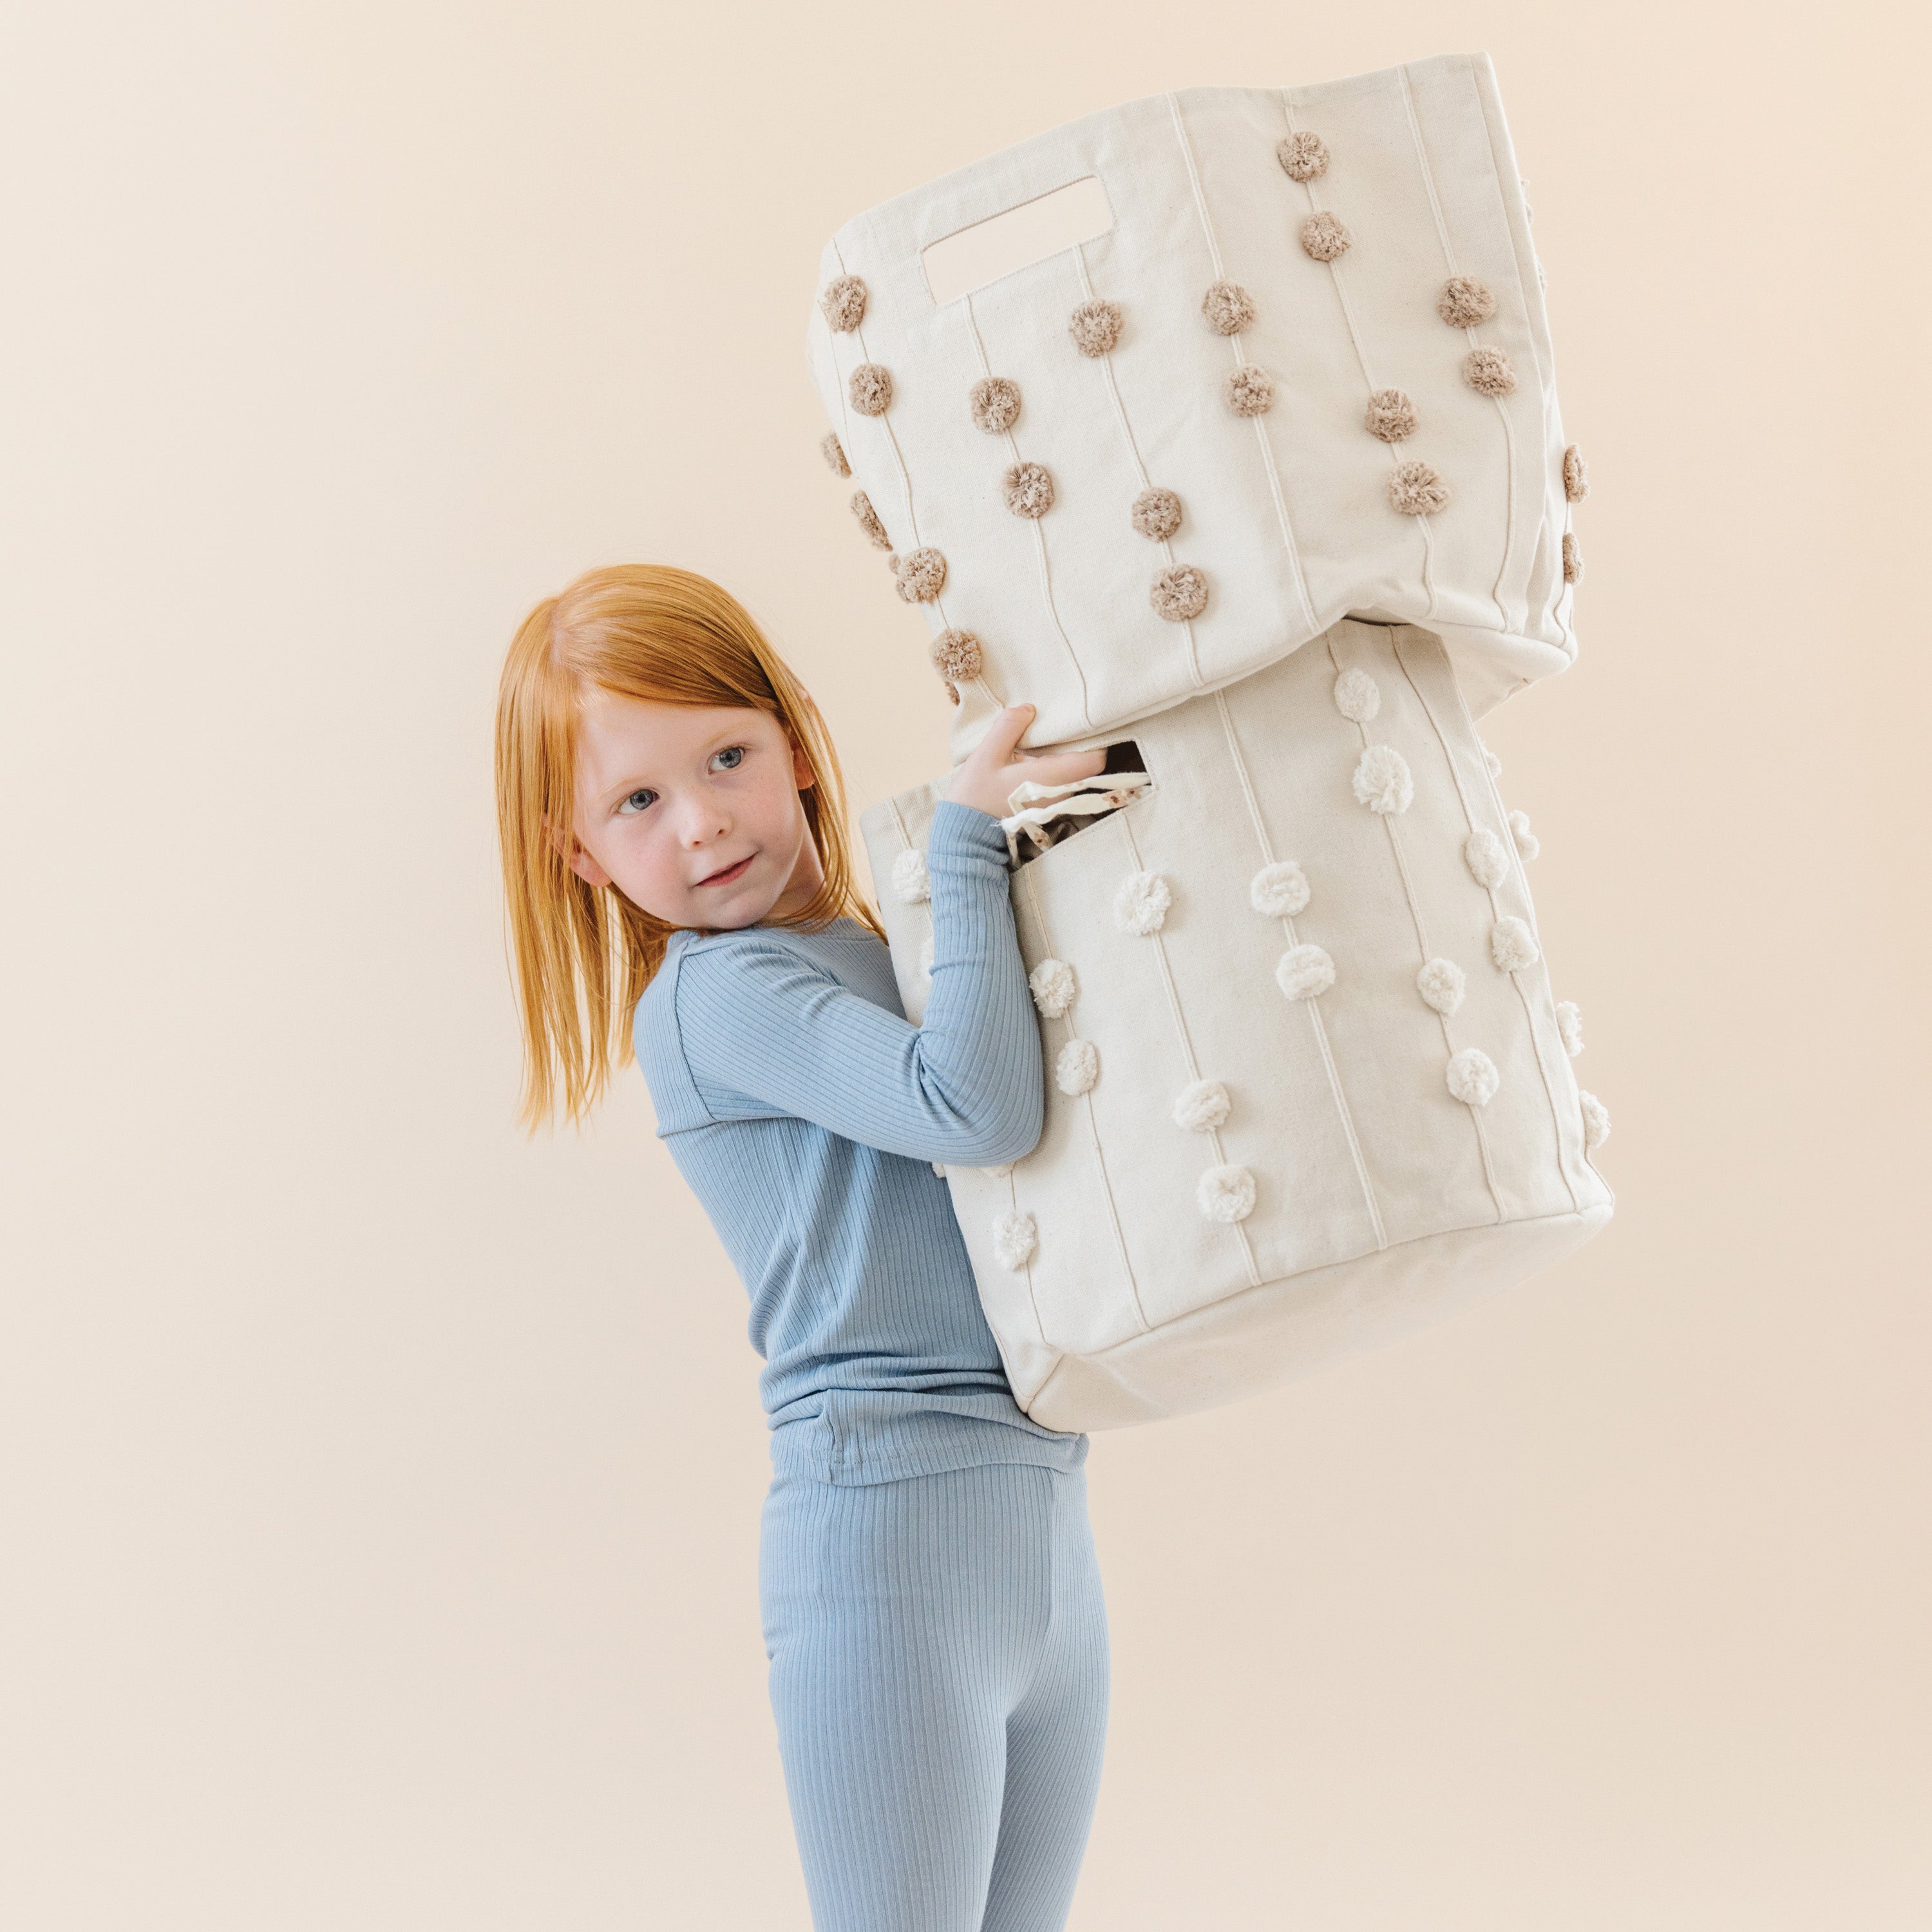 A young girl with red hair, wearing a blue outfit, playfully holds up a large white Storage Basket Pompom Taupe from Makemake Organics against a light beige background.